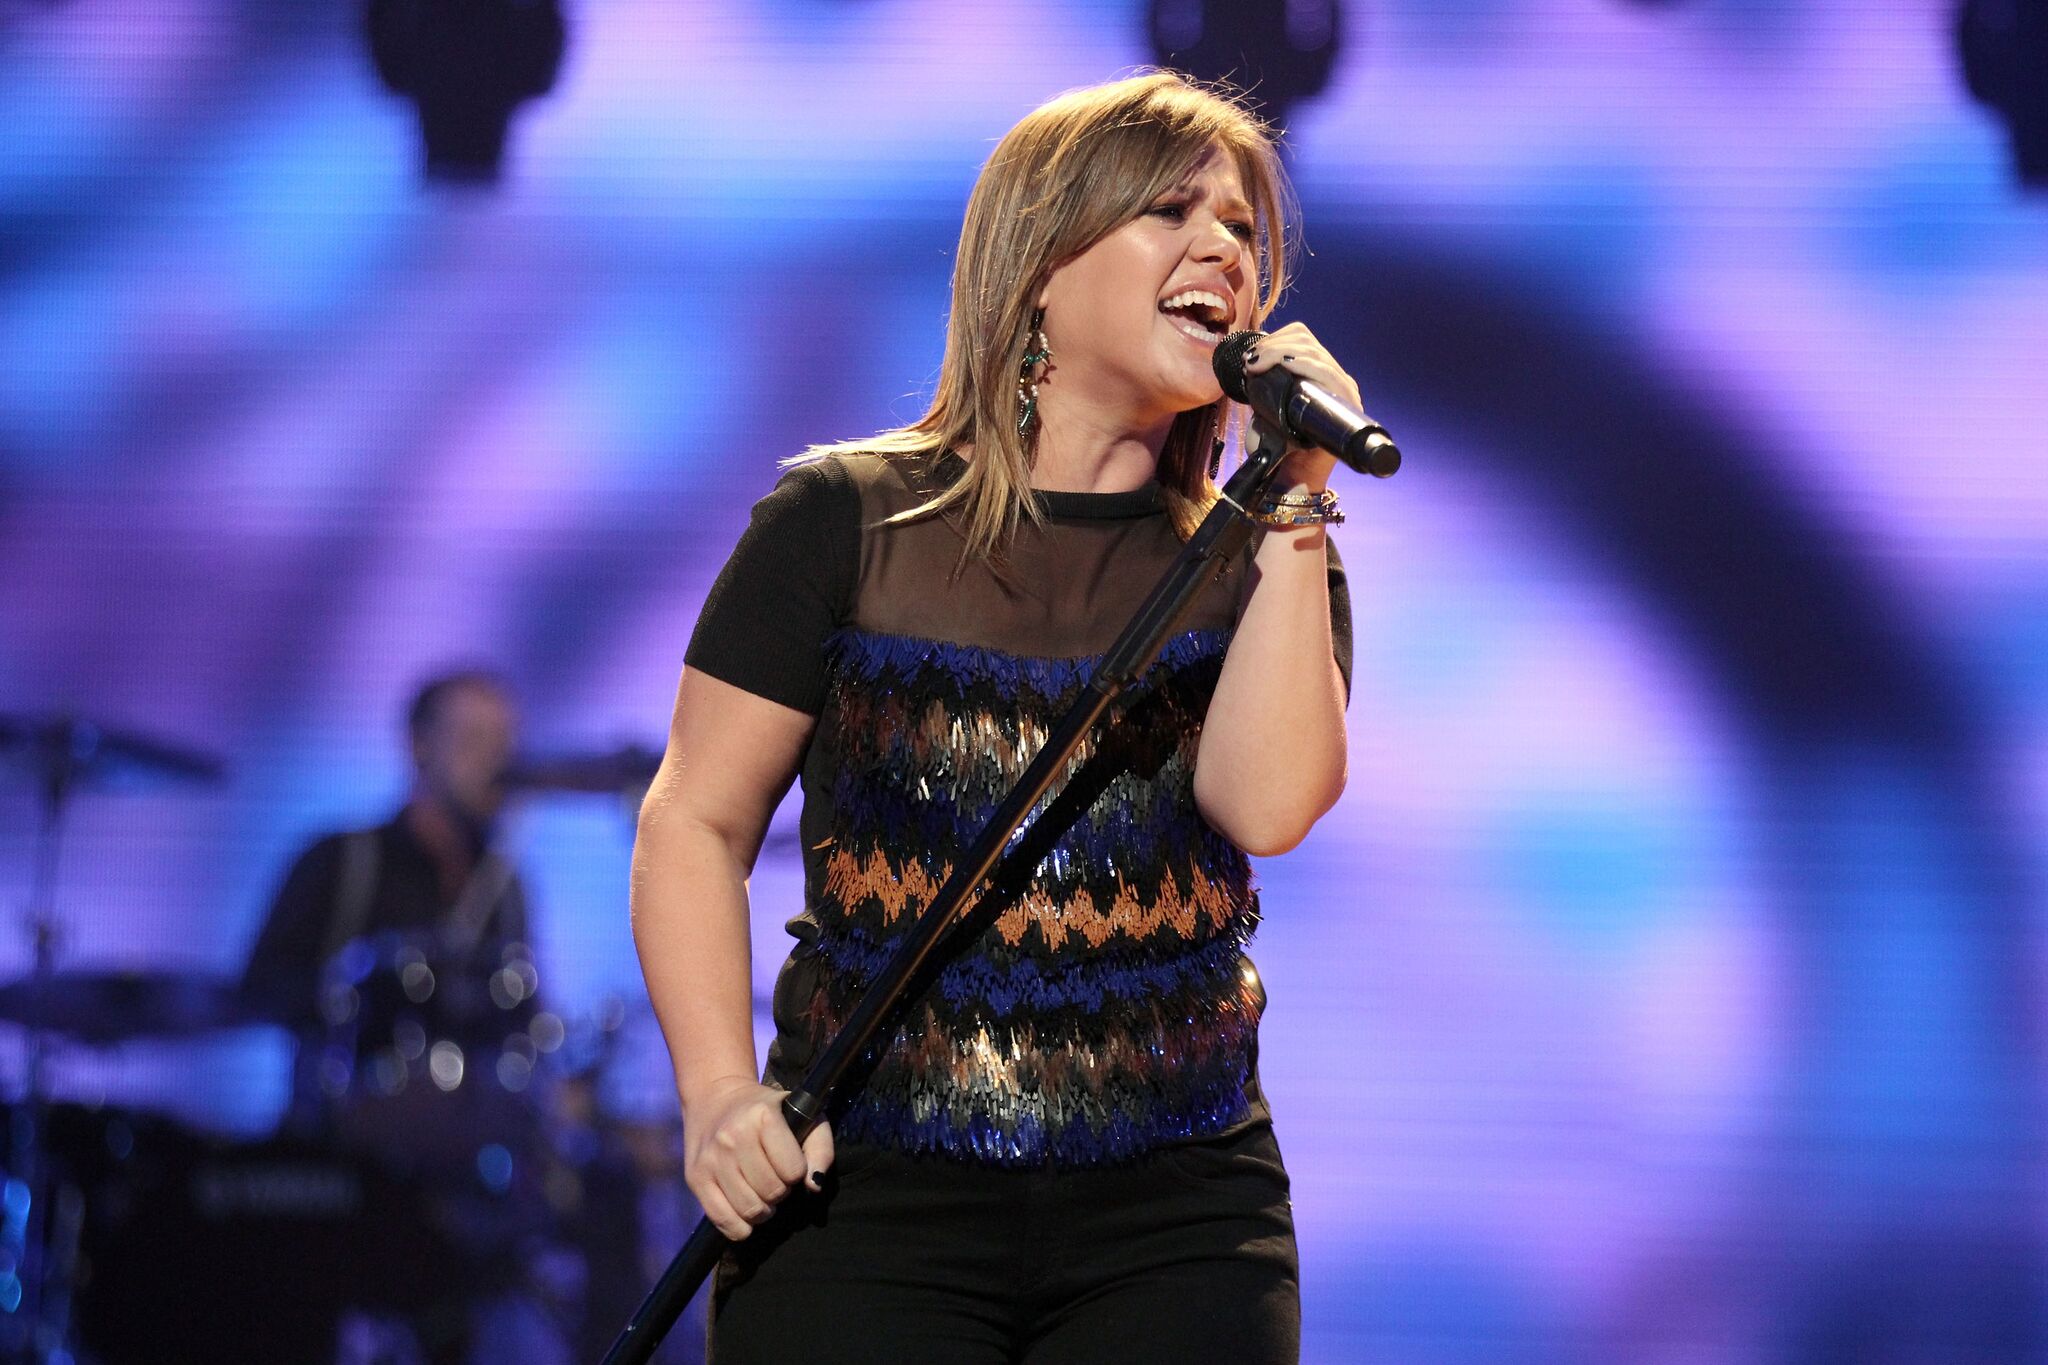  Kelly Clarkson performs onstage at the iHeartRadio Music Festival | Getty Images